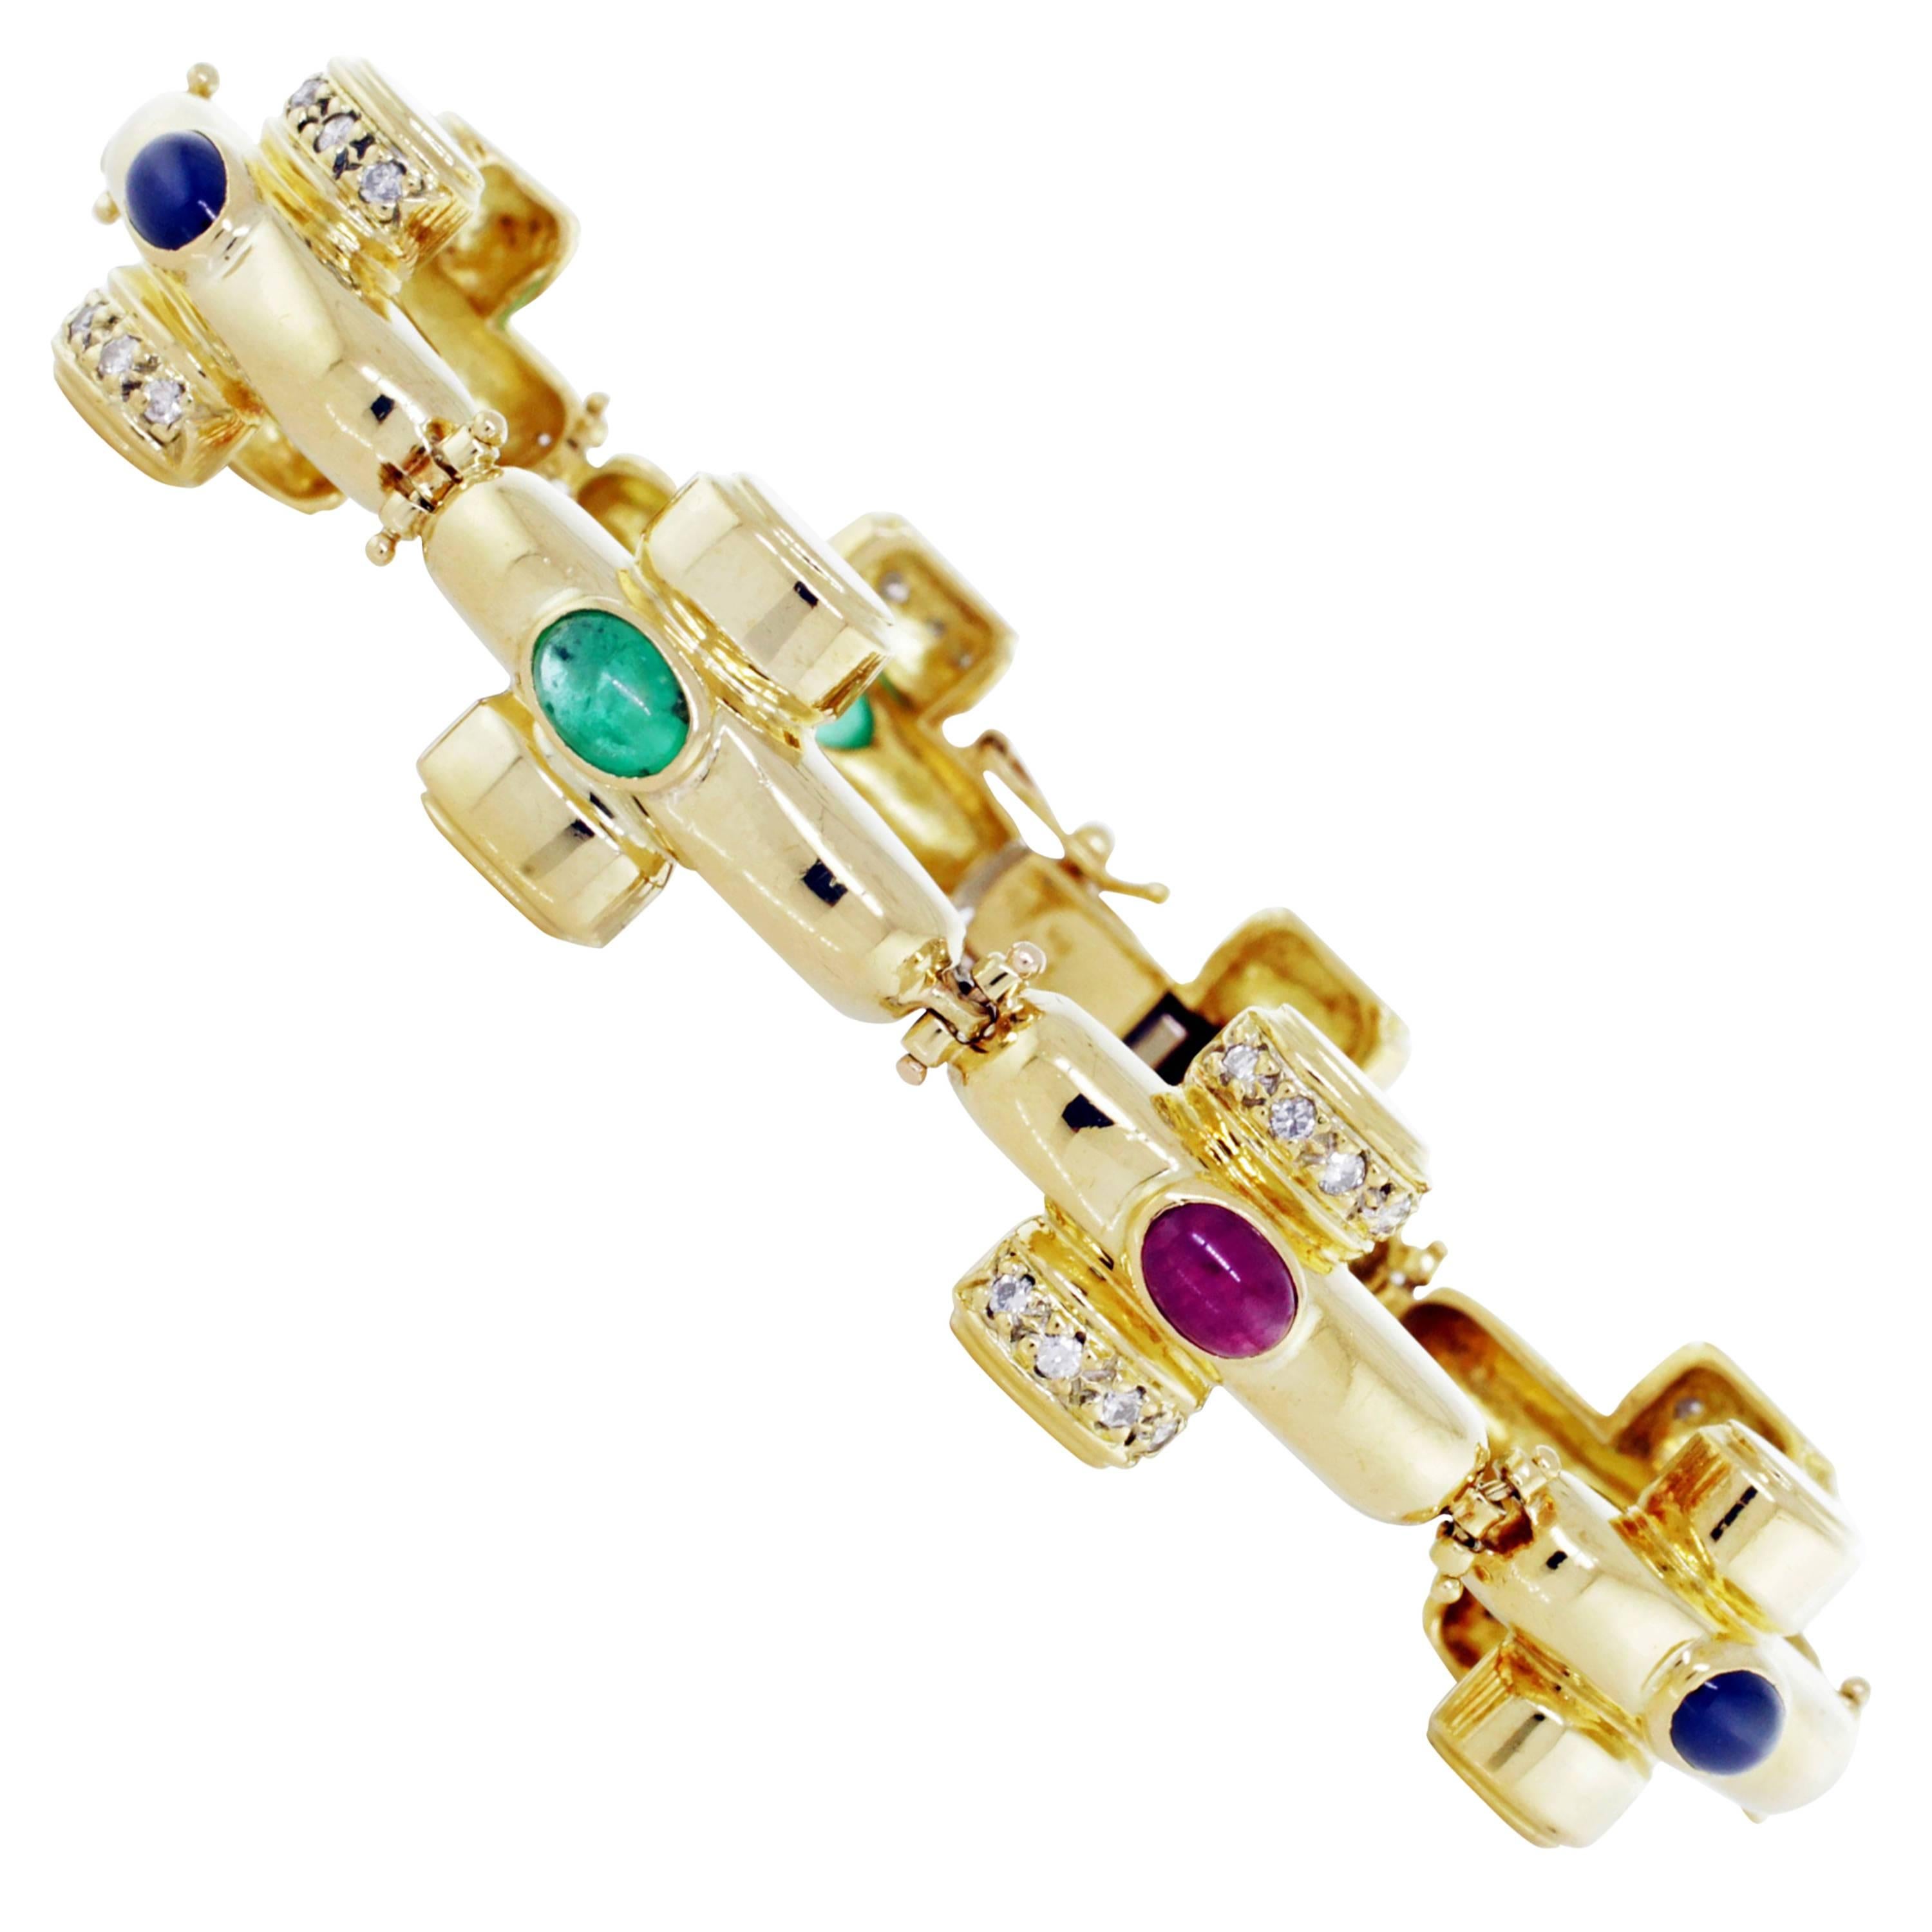 Yellow Gold Link Bracelet with Diamond Rubies and Emeralds